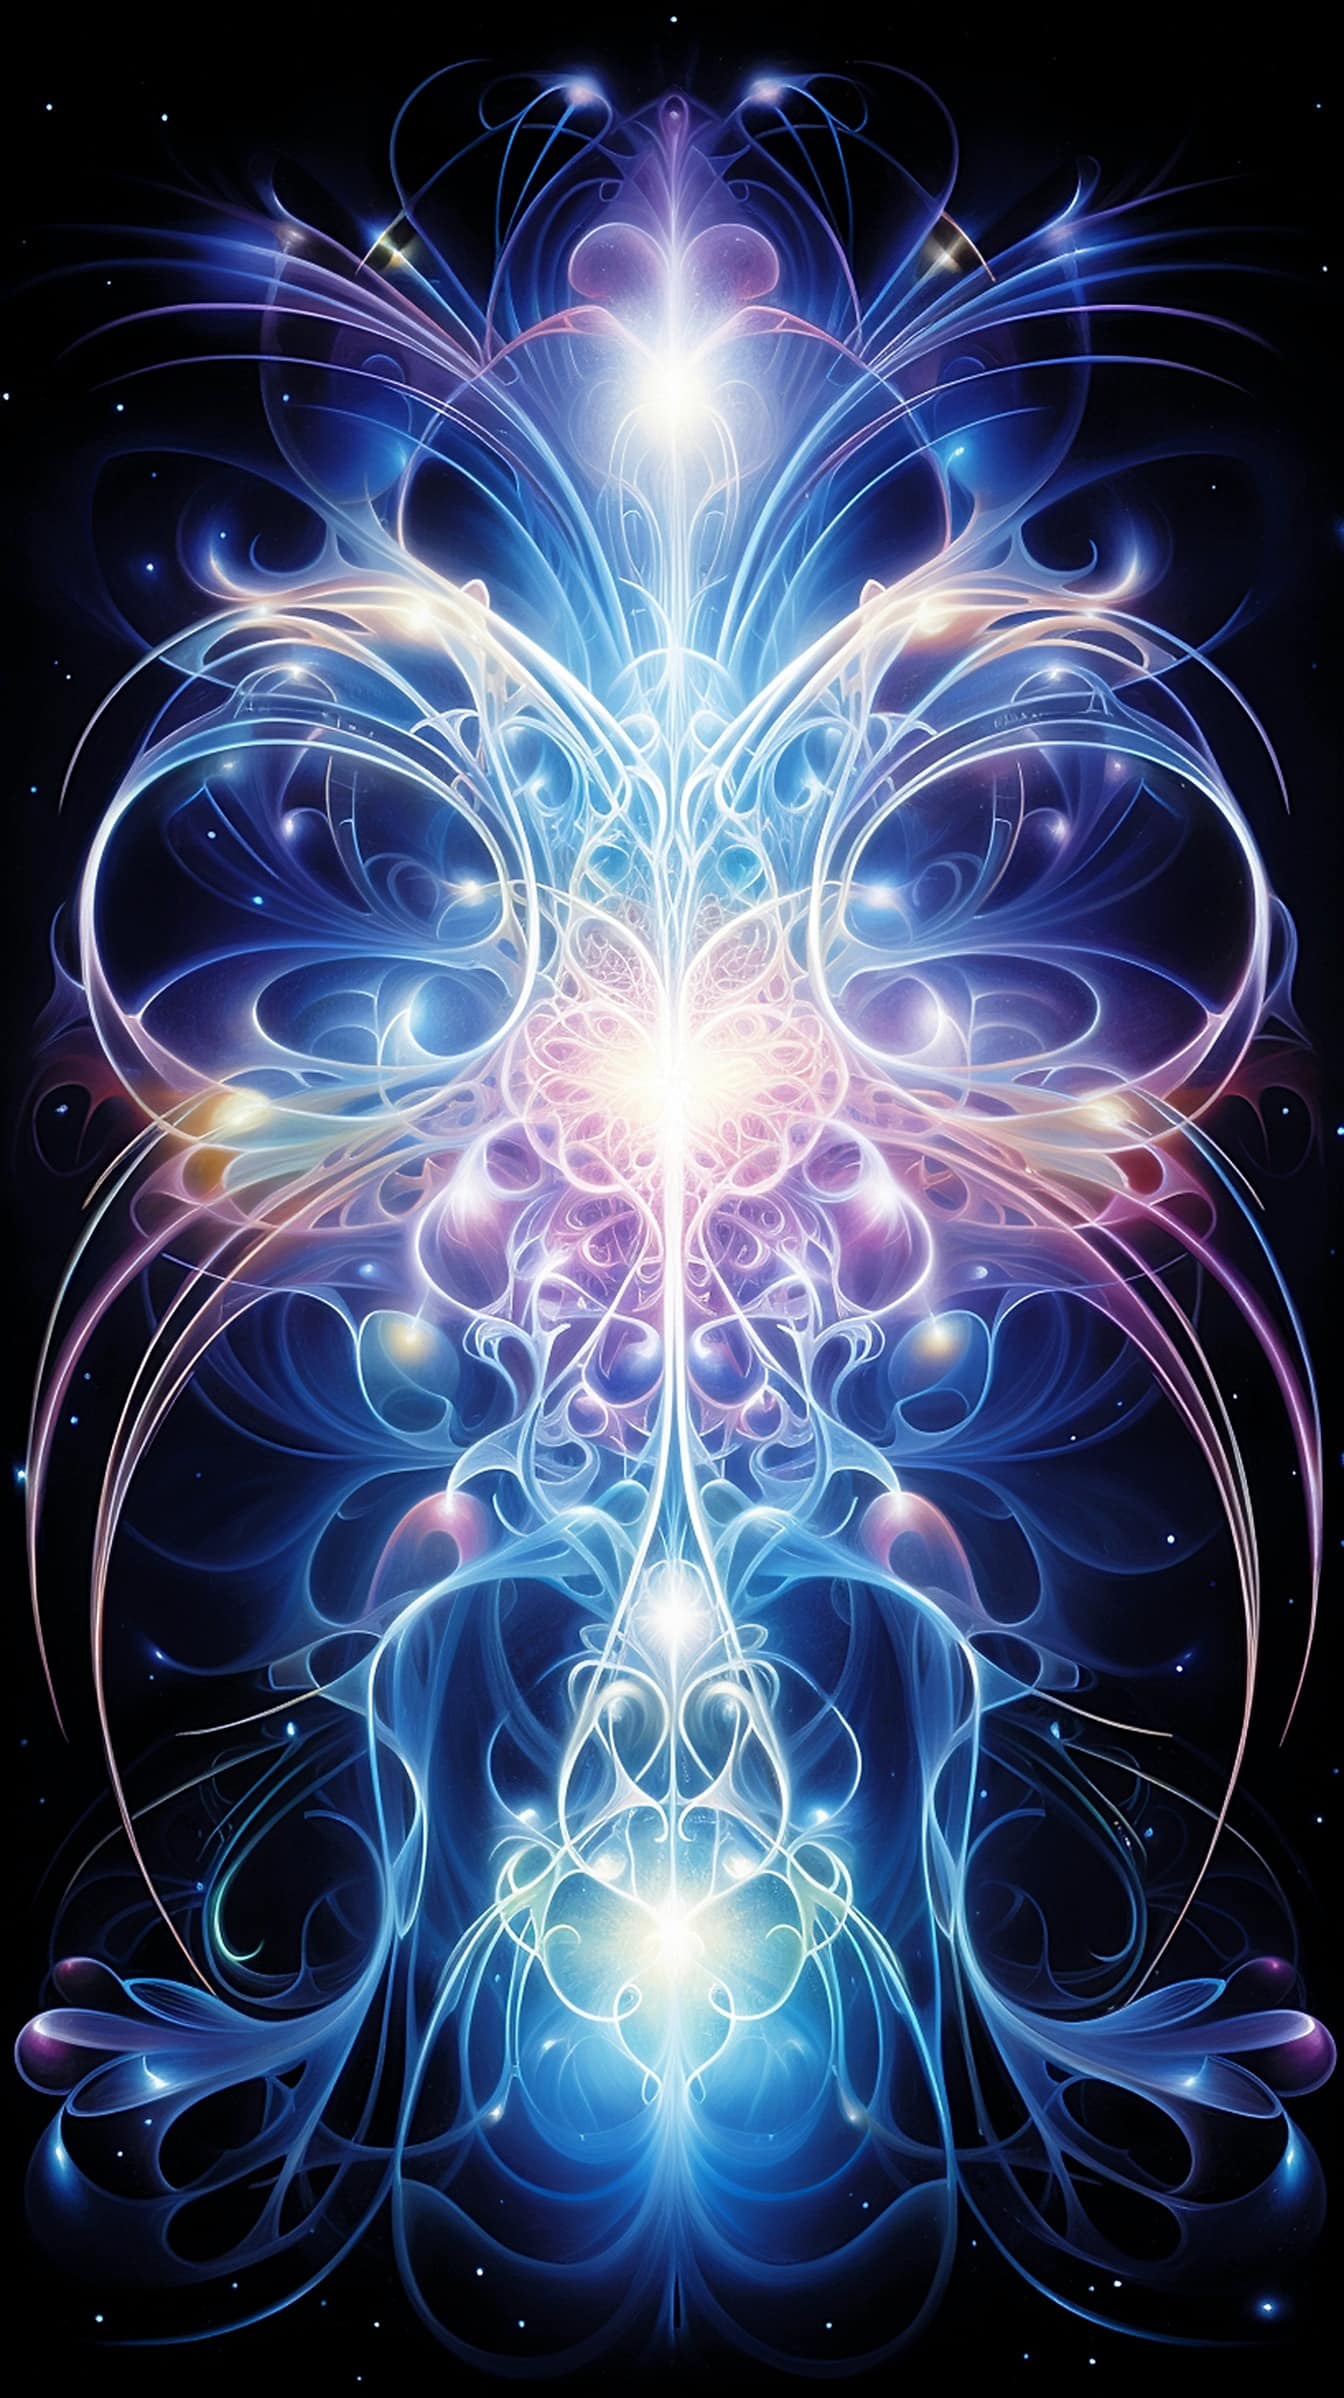 Surreal colorful glowing design depicting vertical symmetry art